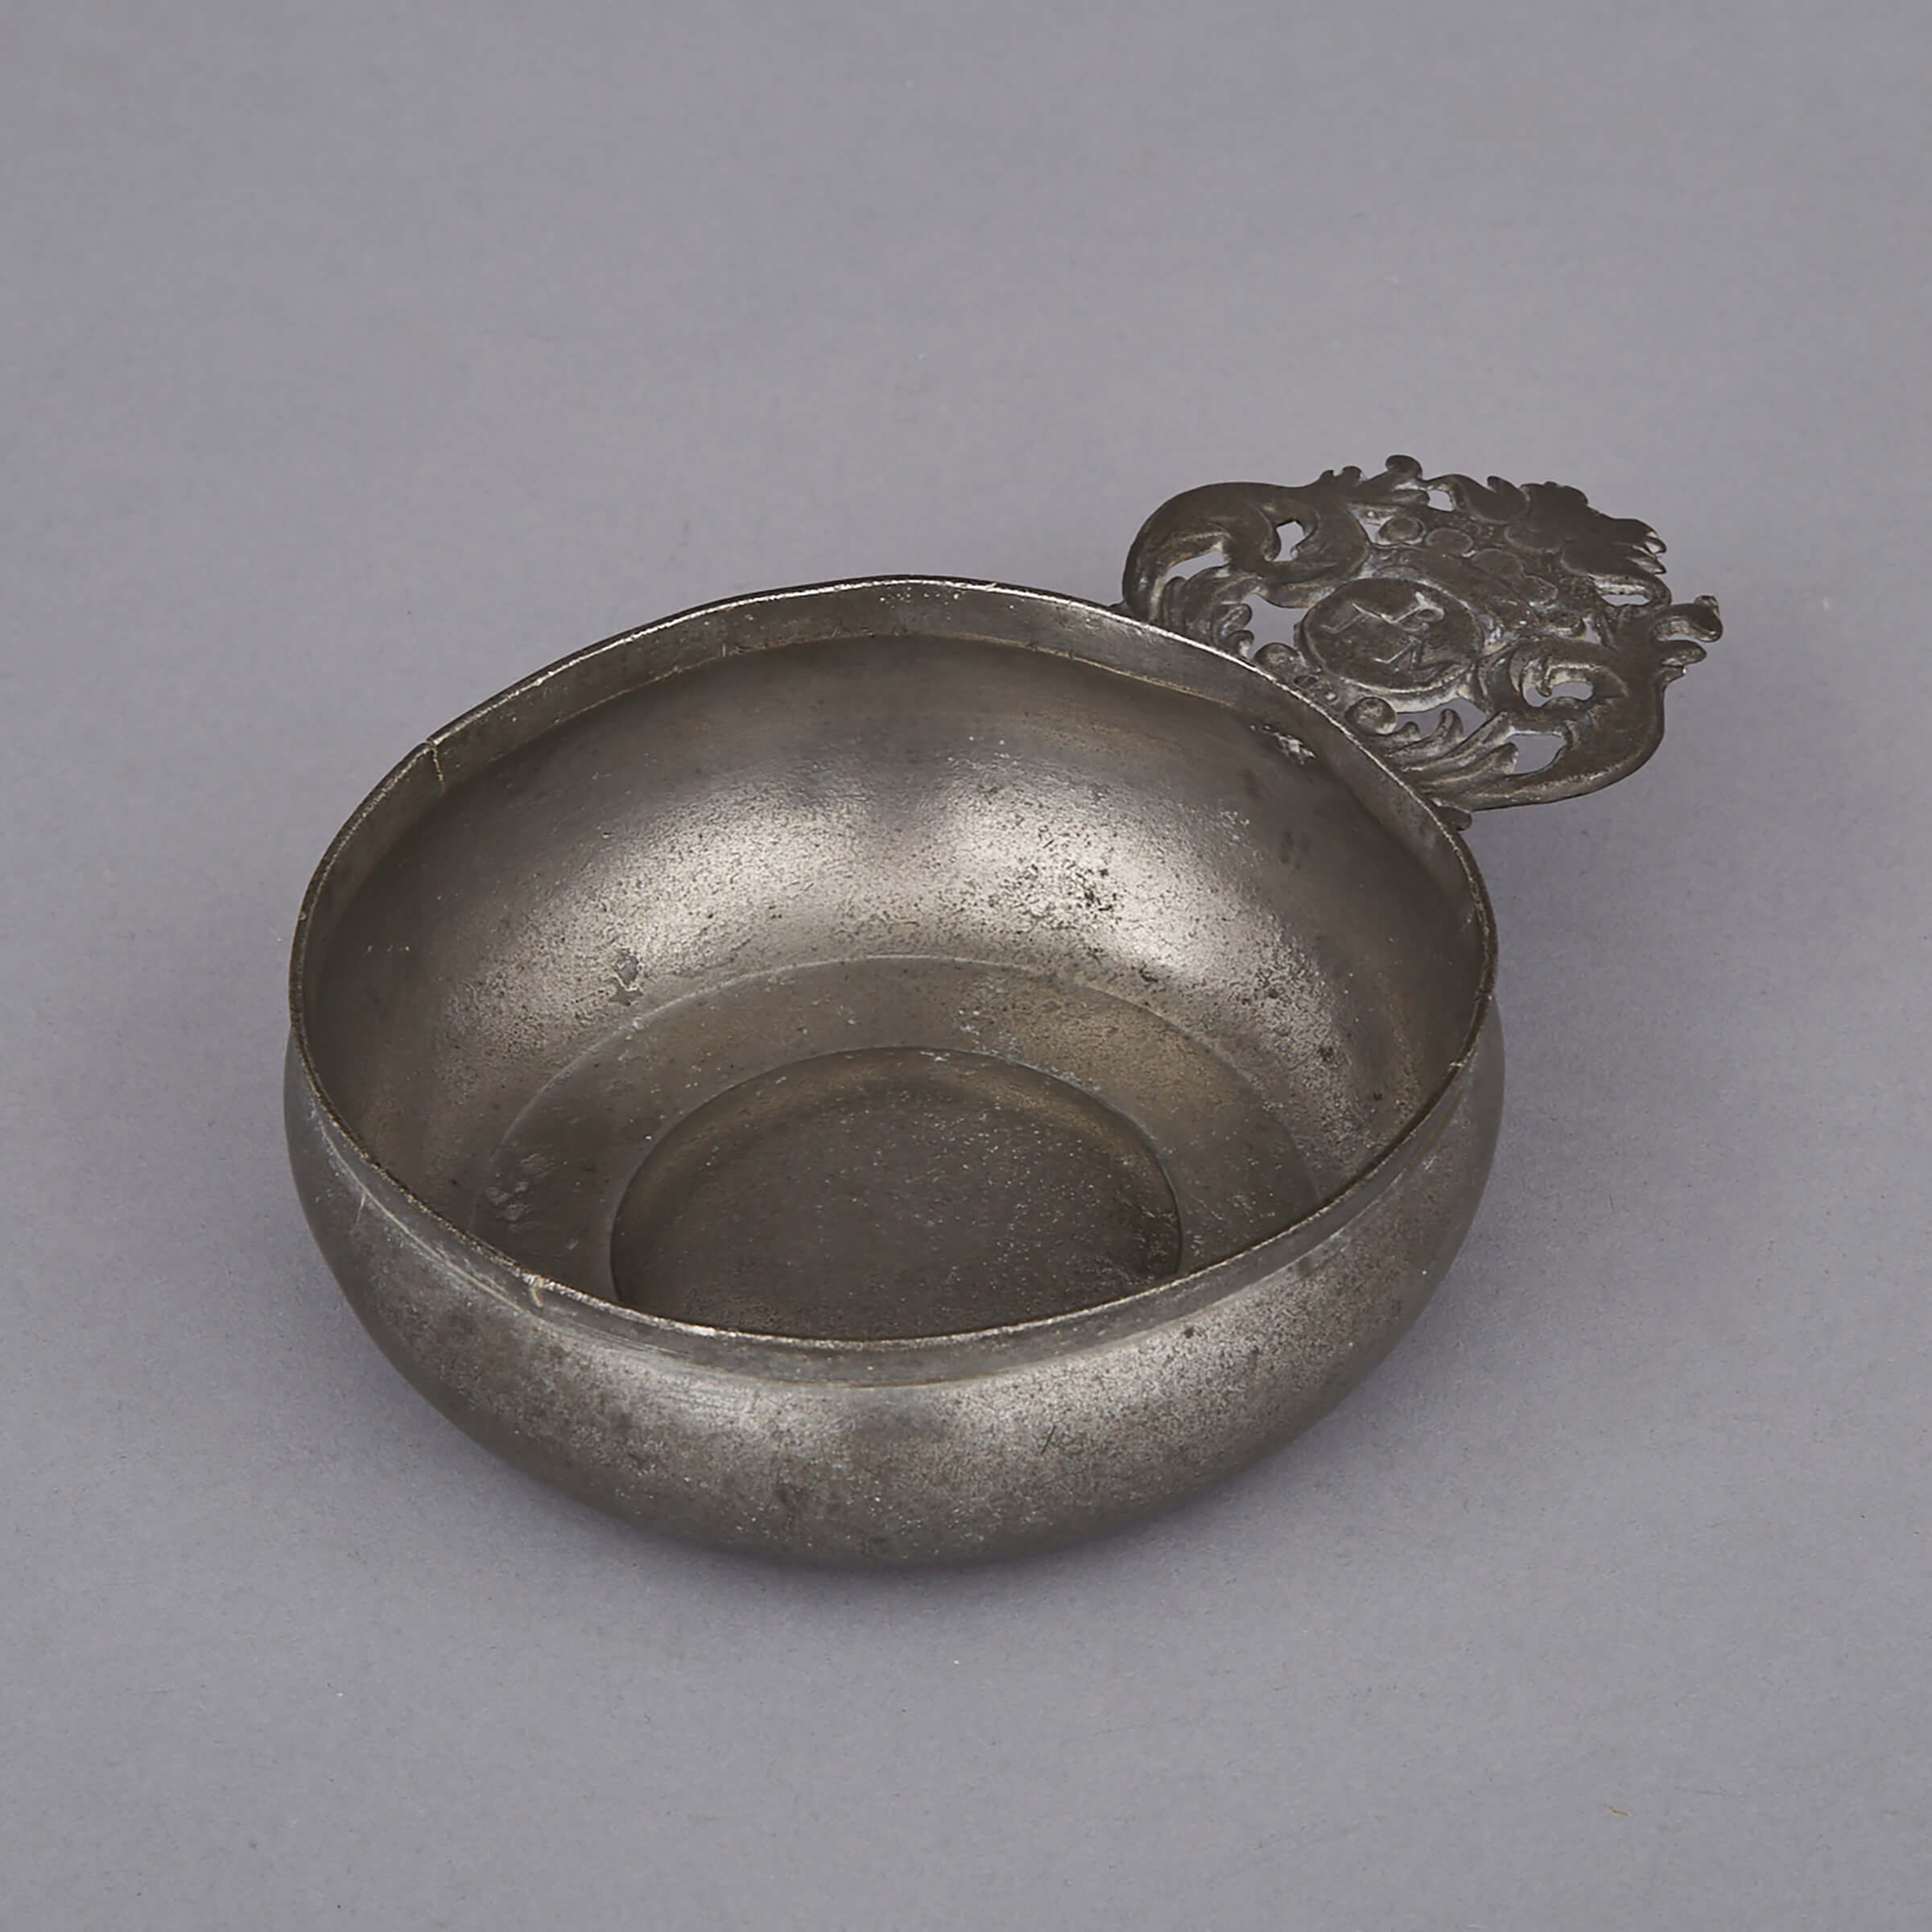 English Pewter Porringer, Thomas Page, Bristol, early to mid 18th century